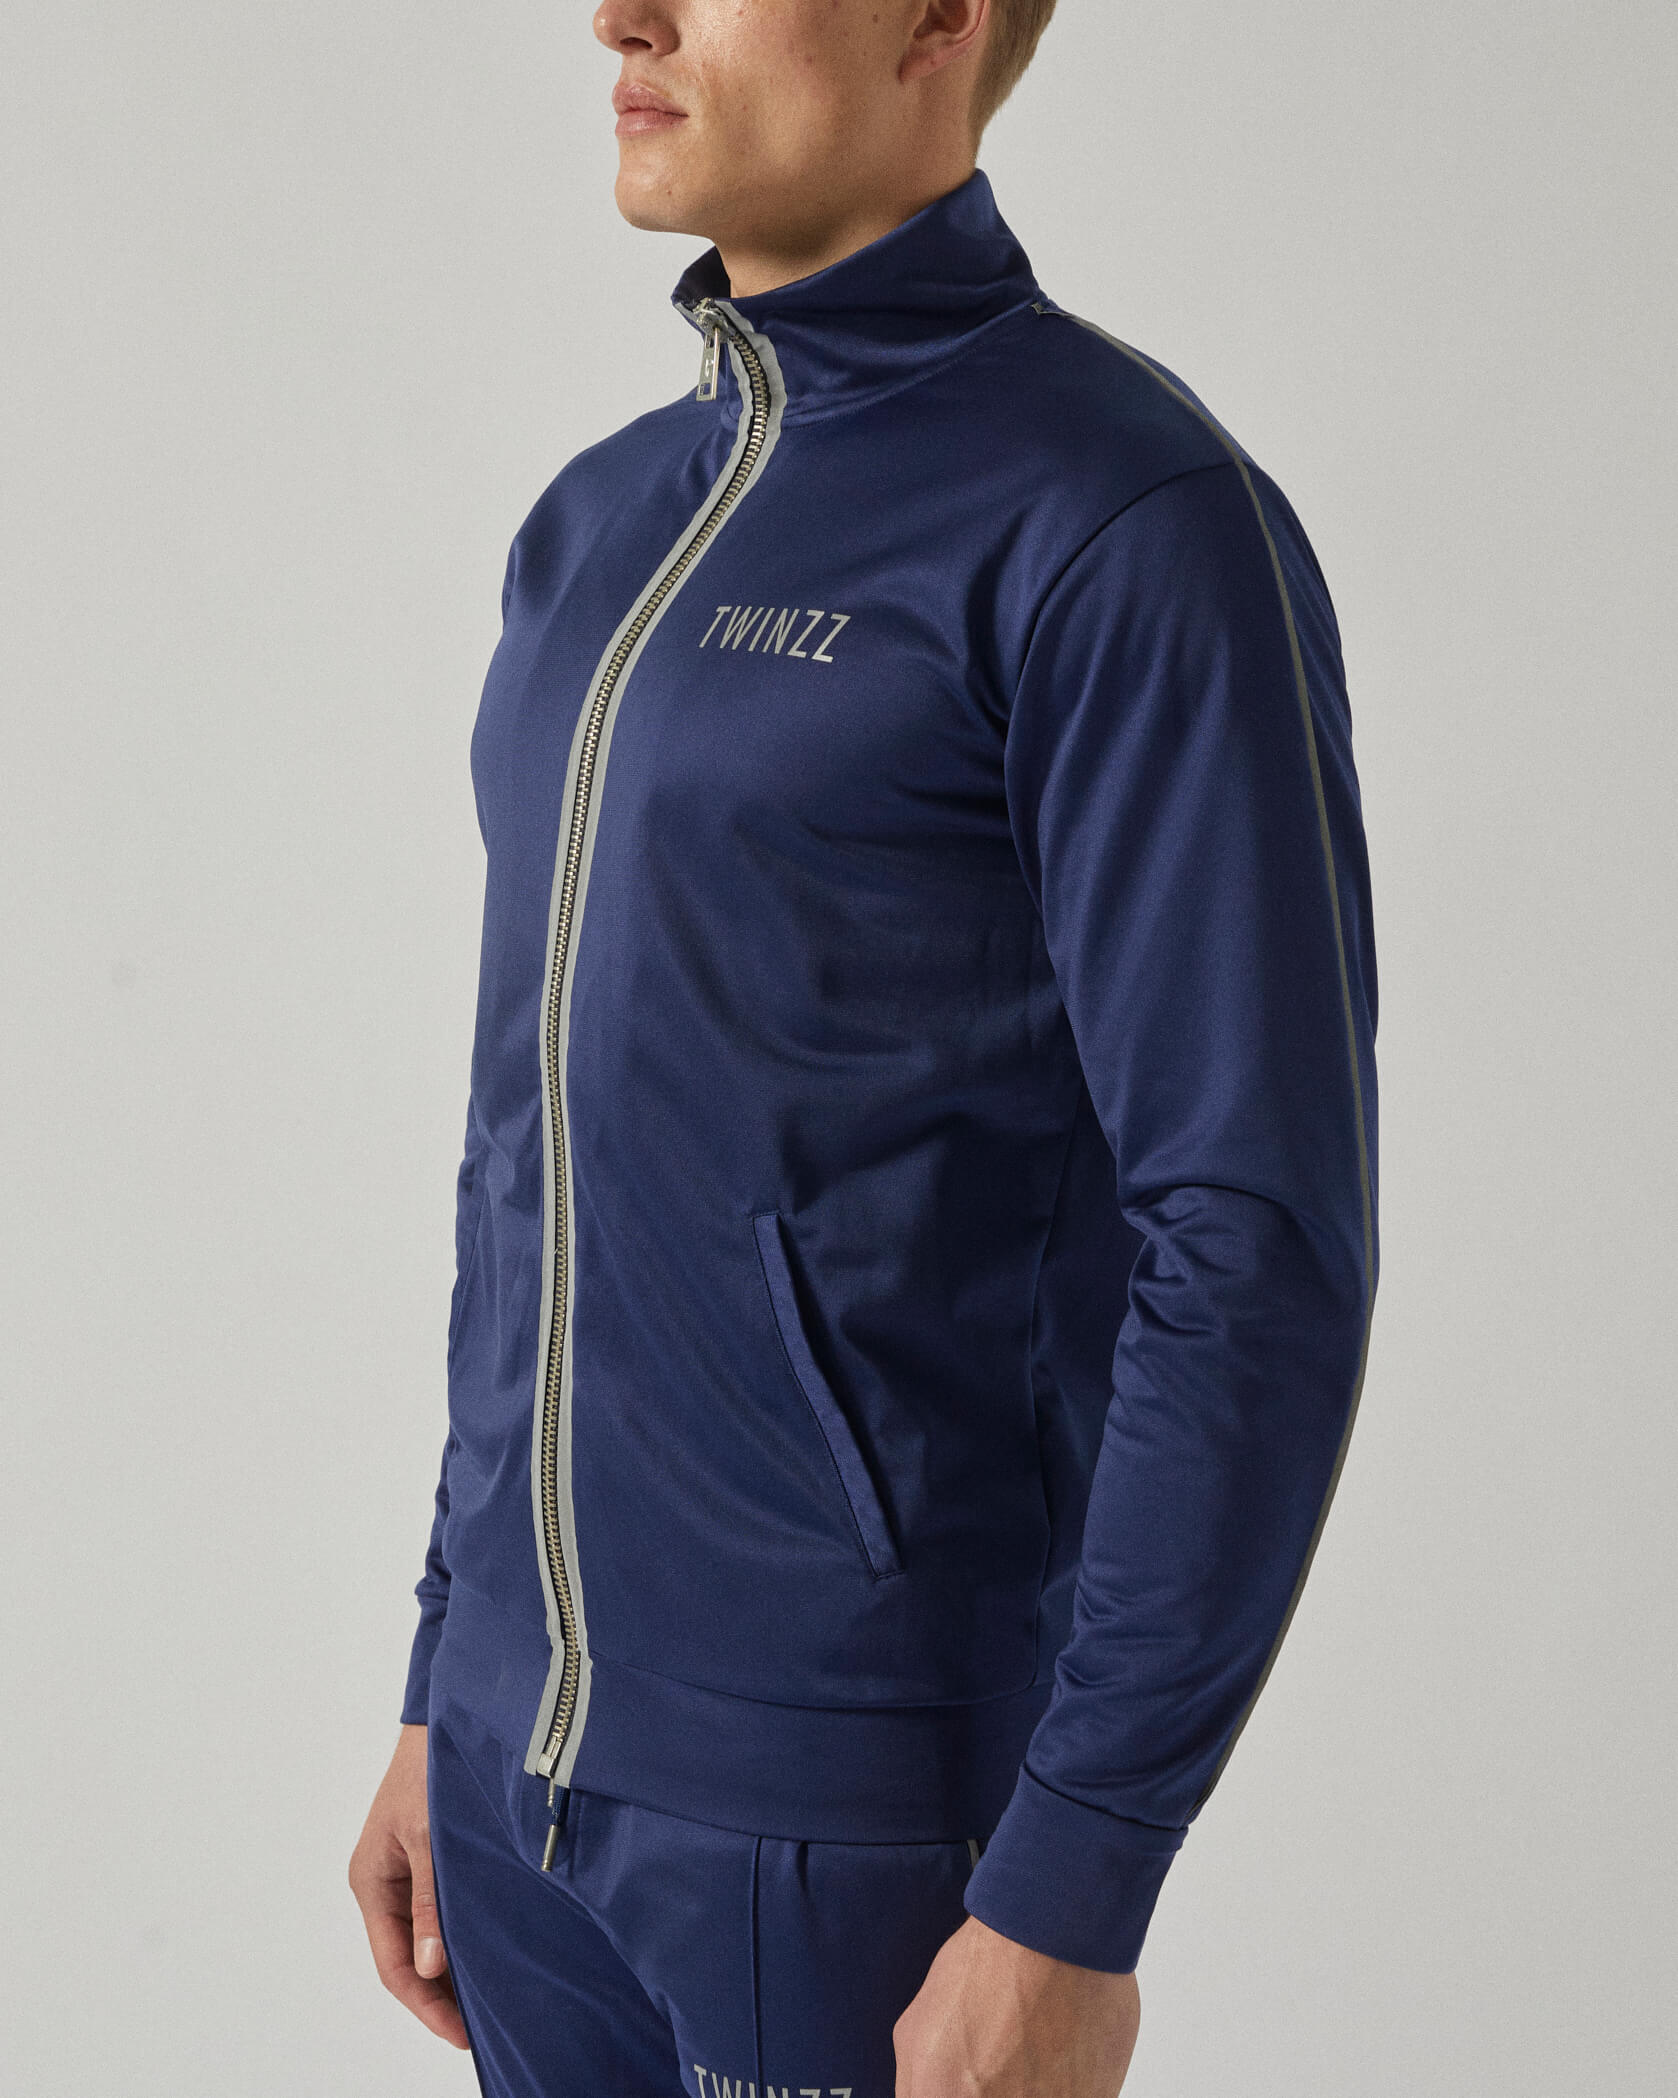 Twinzz Tech navy track jacket on model zipped up